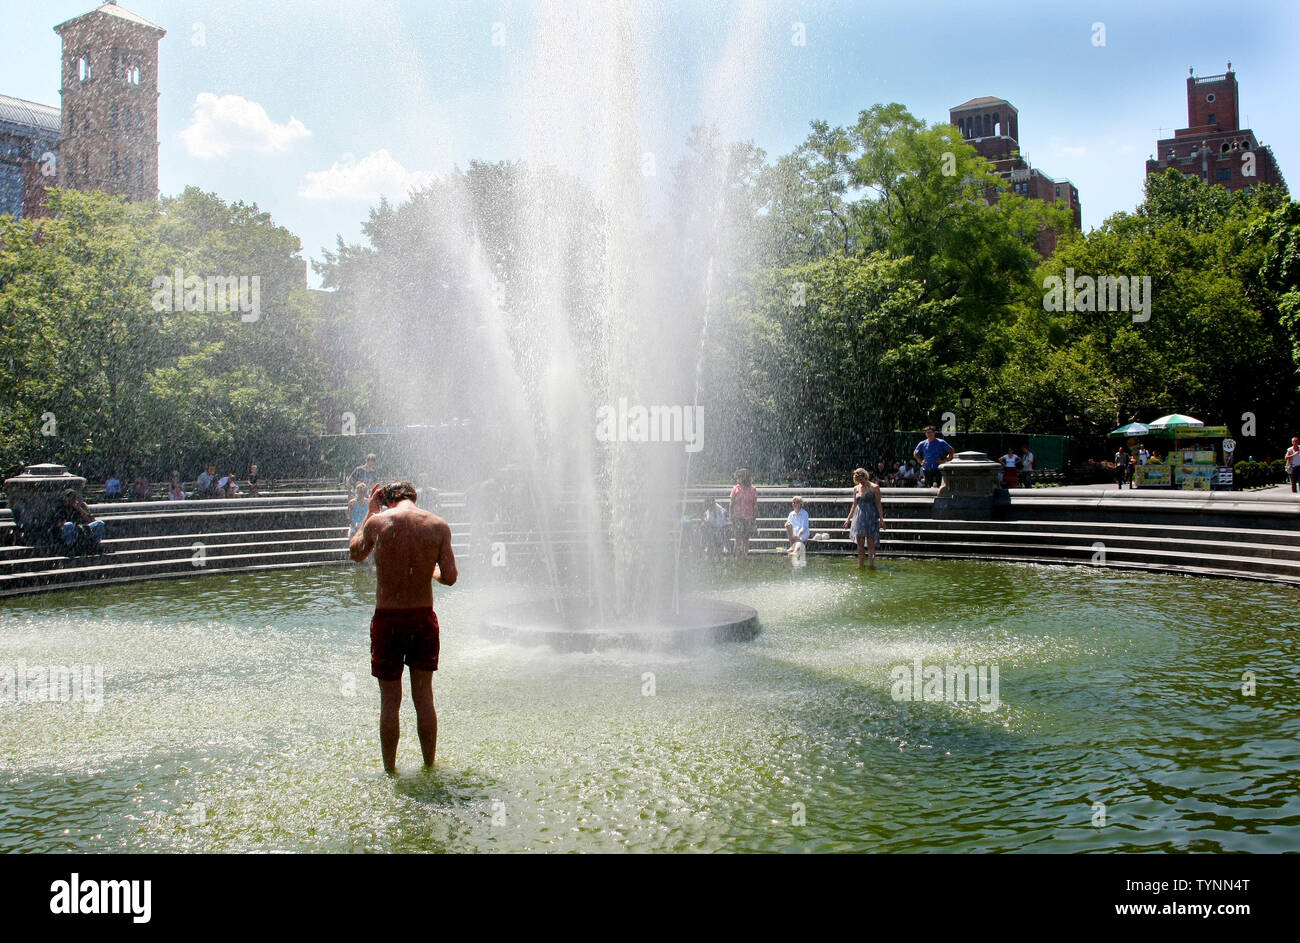 A man cools off in the fountain in Washington Square Park as temperatures approach the triple digit mark on July 18, 2013 in New York. People are finding ways to stay cool as heat advisories are in effect while an oppressive heat wave continues across the area.     UPI/Monika Graff Stock Photo